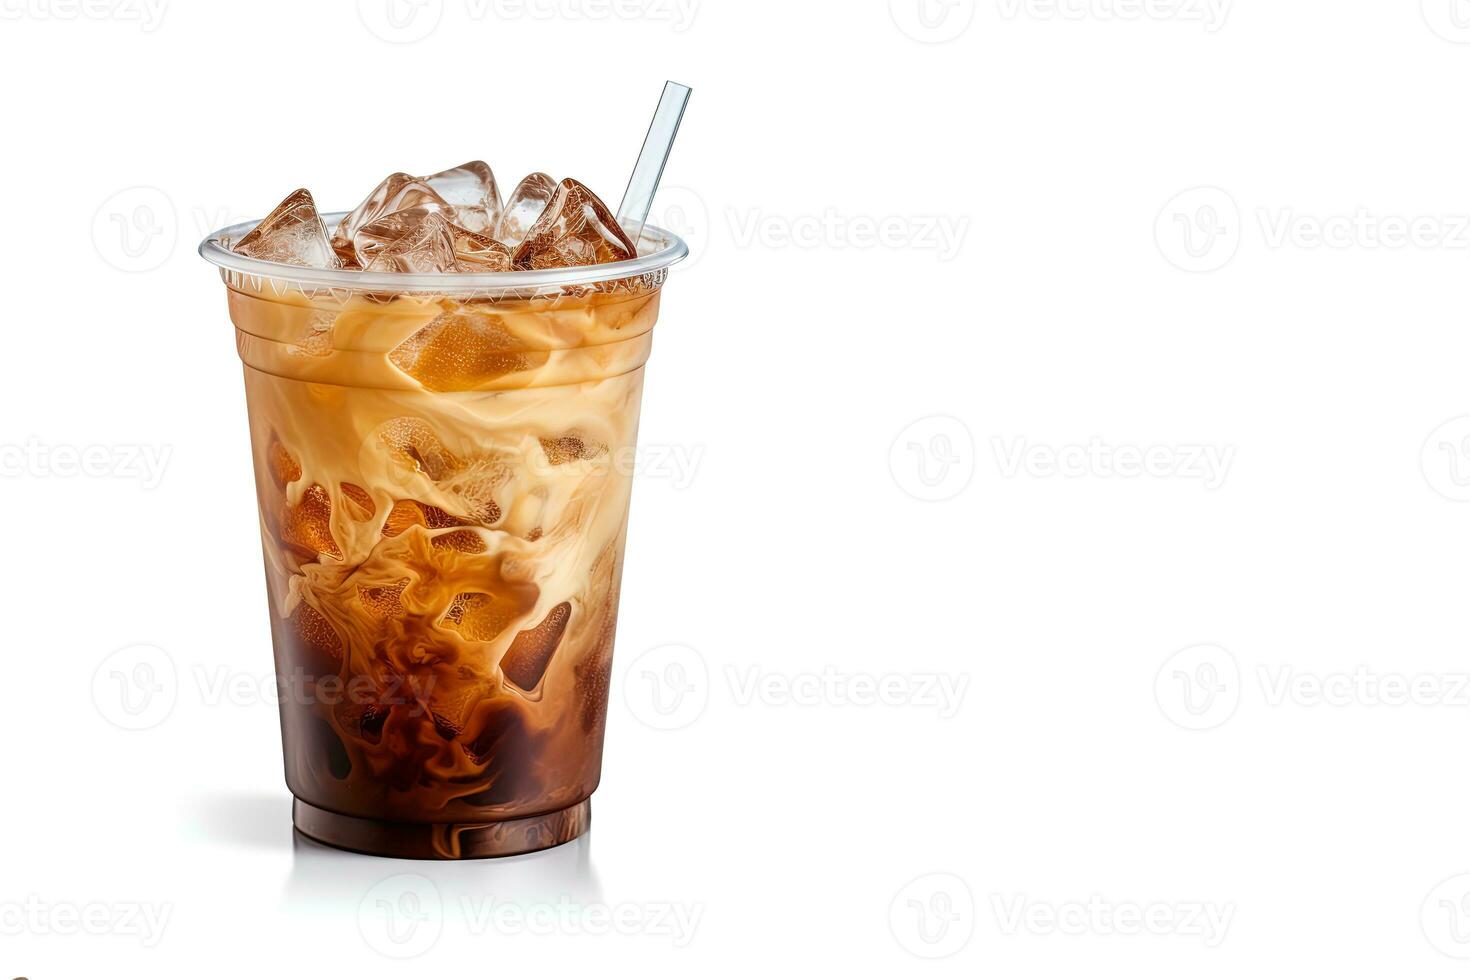 https://static.vecteezy.com/system/resources/previews/027/959/296/non_2x/iced-coffee-in-plastic-takeaway-glass-isolated-on-white-background-with-copy-space-ai-generated-photo.jpg